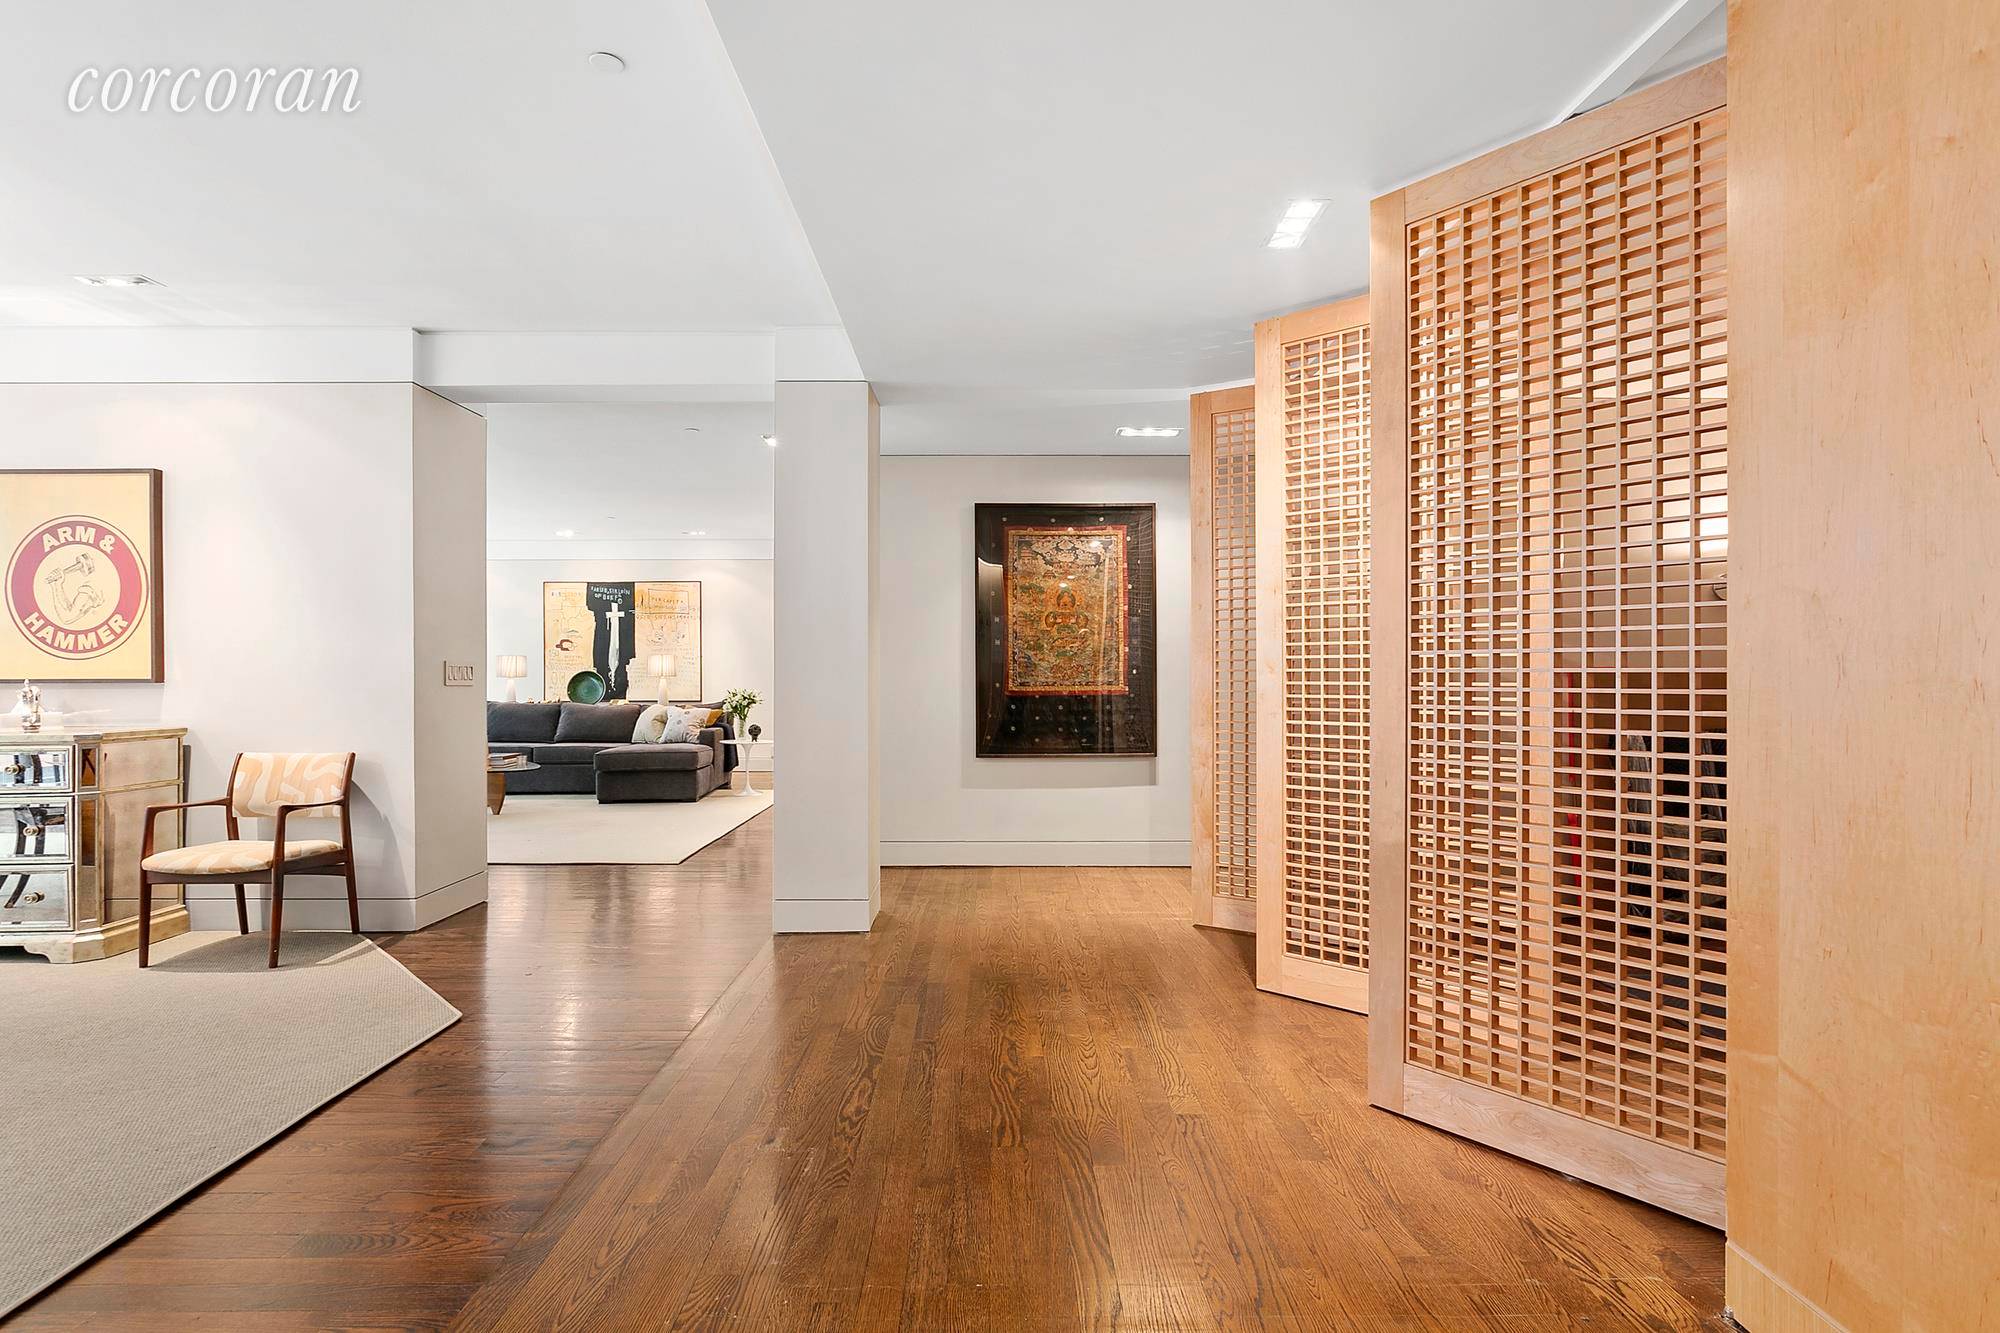 Come home to a rarely available, custom designed loft at 497 Greenwich Street.